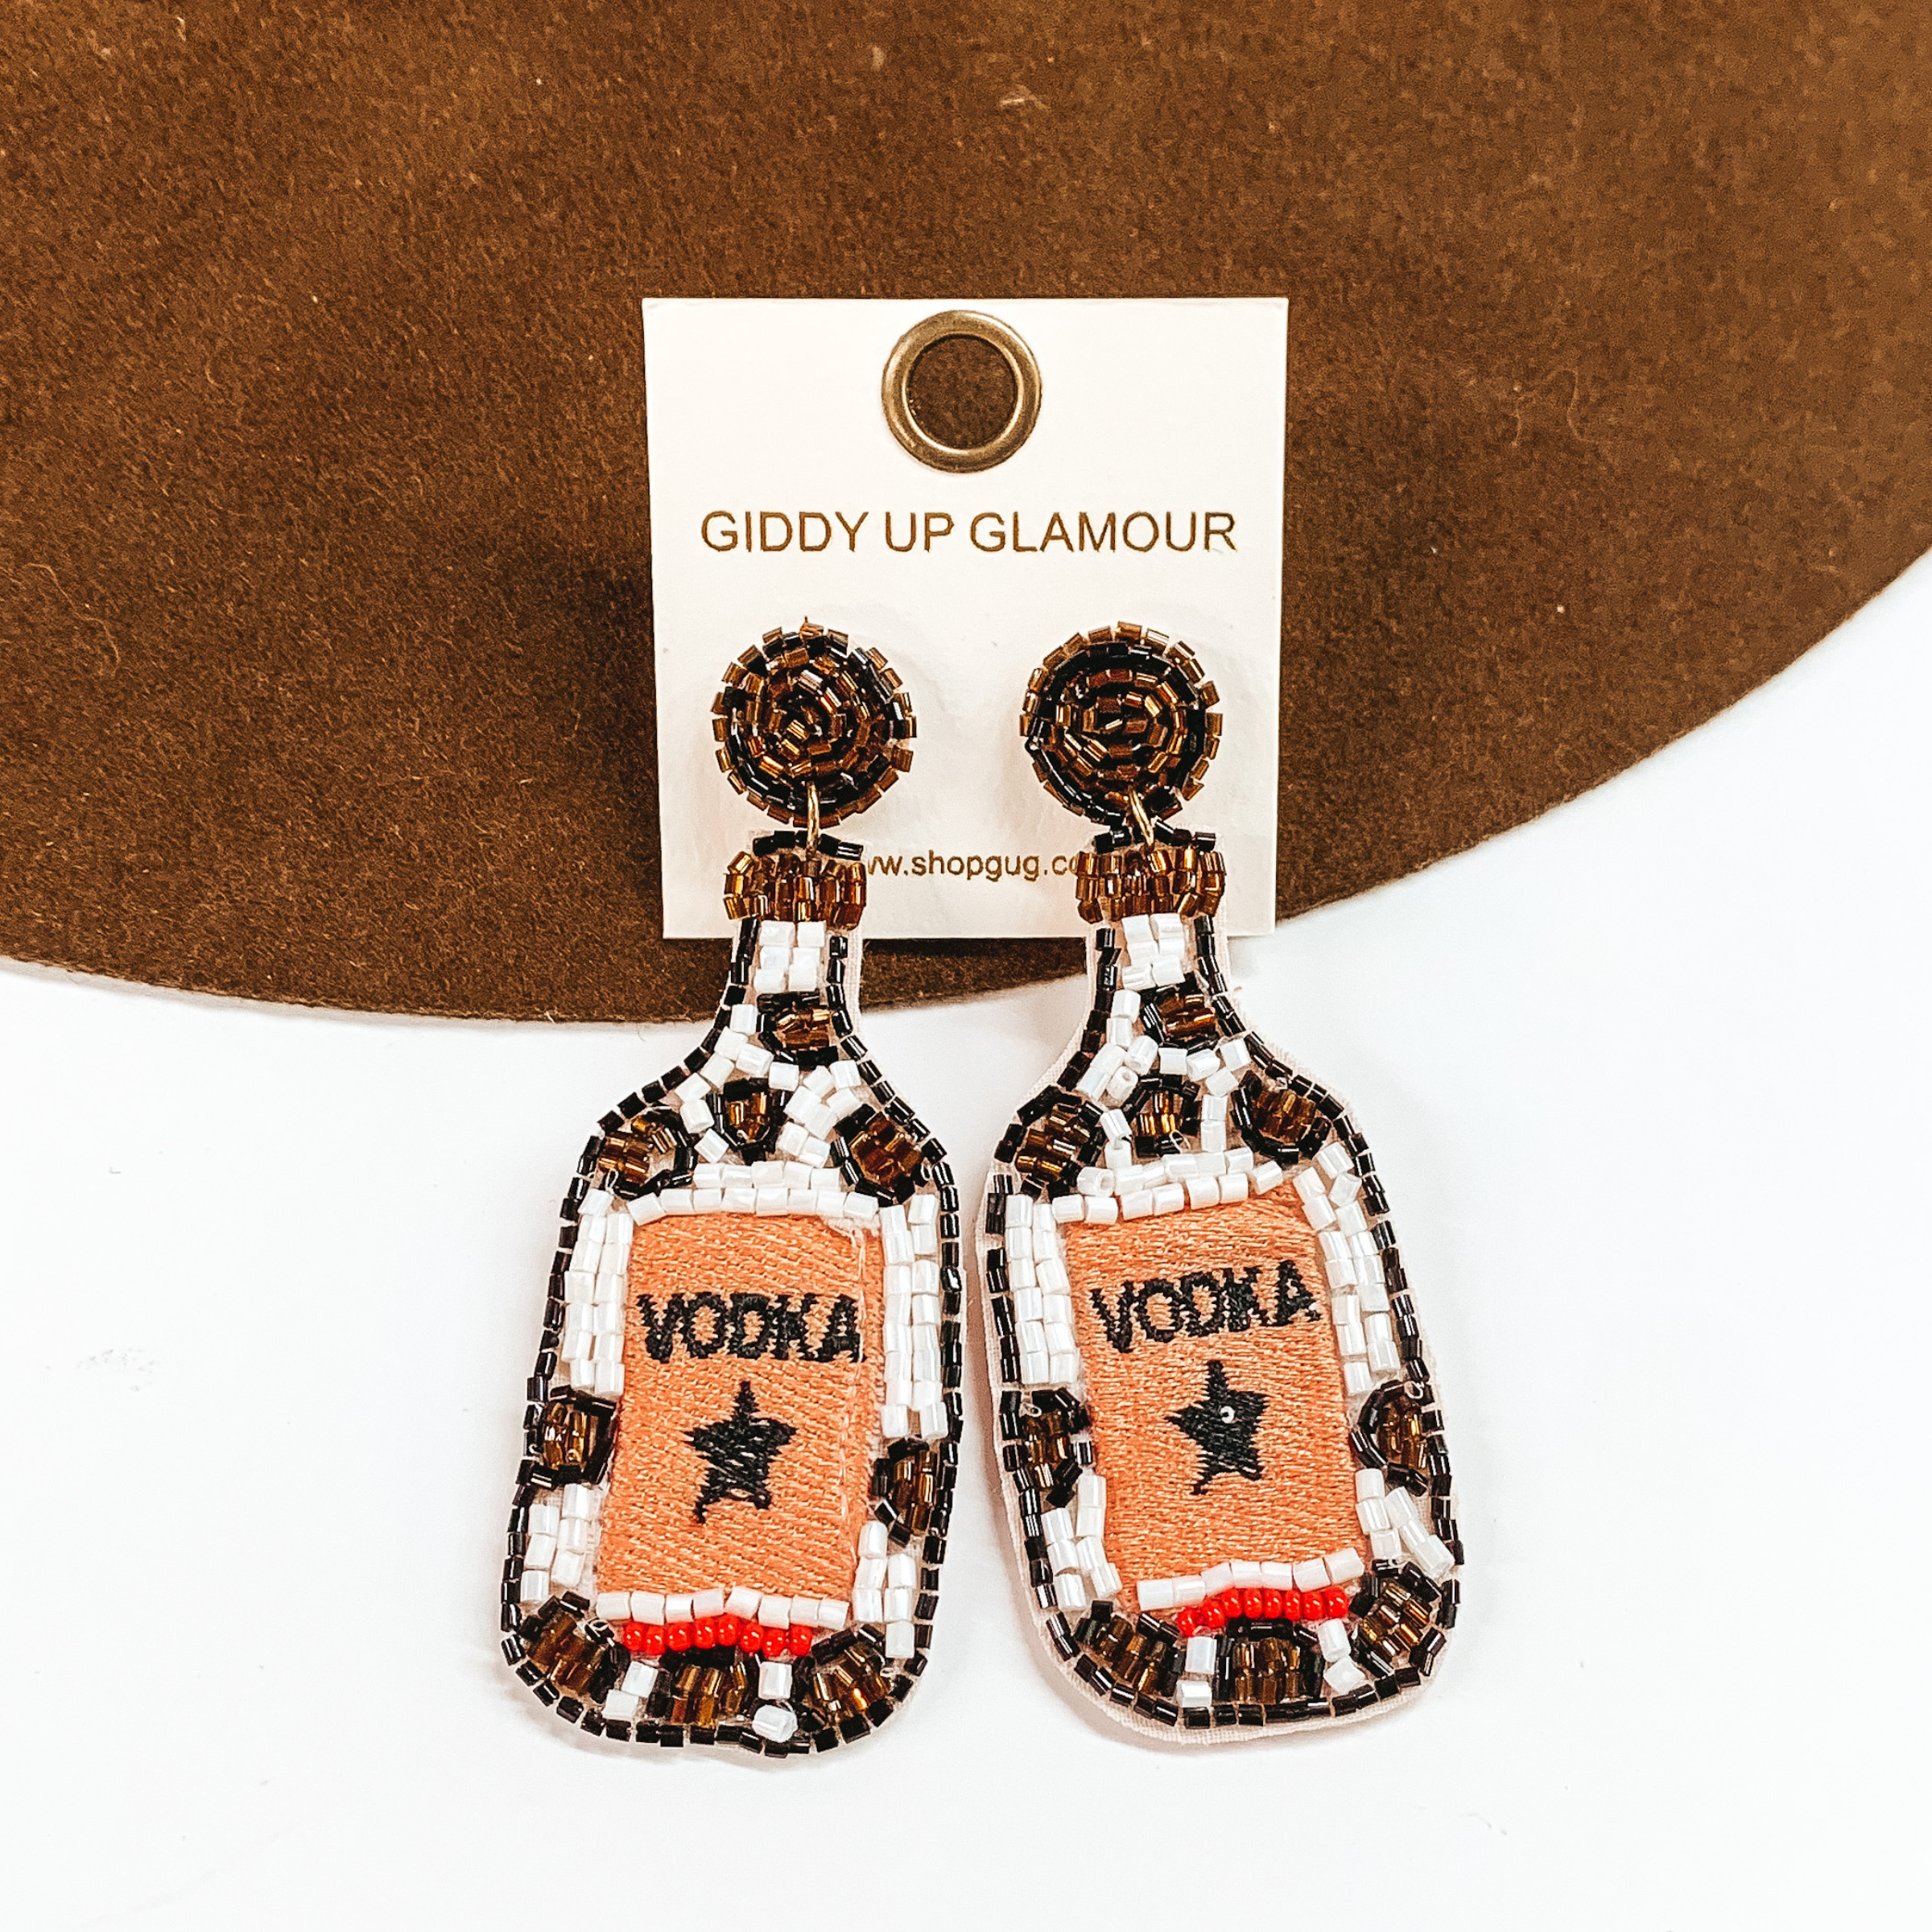 White beaded bottle earrings with brown and black beaded design. These earrings also include black stitching of a star and the word "VODKA". These earrings are pictured on a white and brown background.